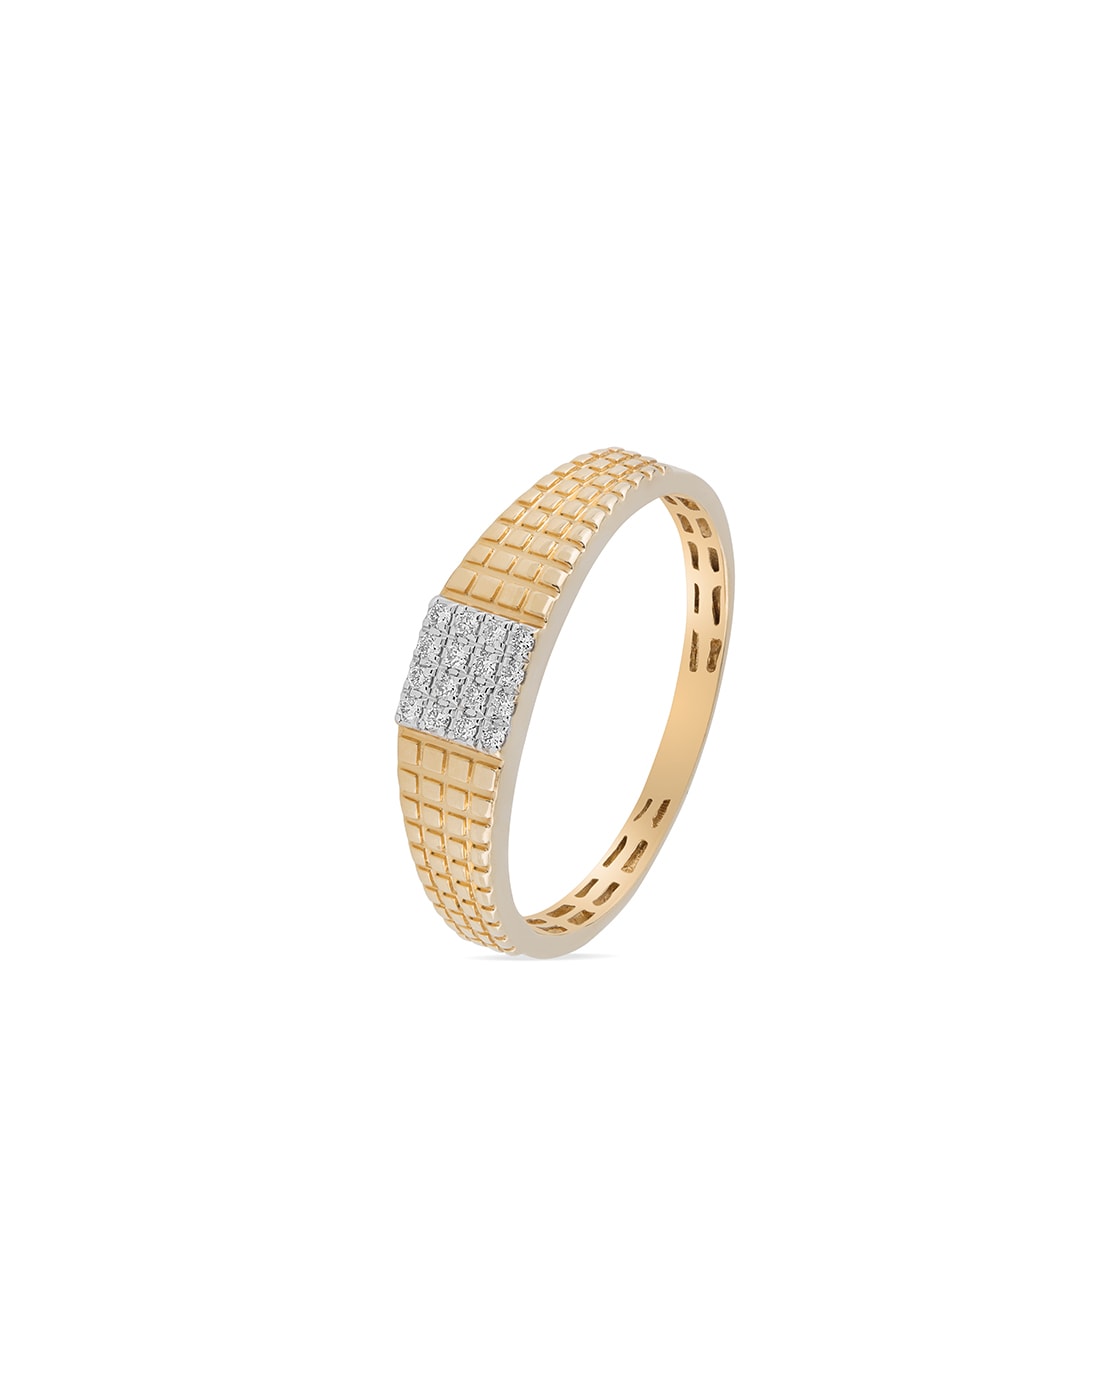 Buy Reliance Jewels 22 KT Gold Ring 5.18 g Online at Best Prices in India -  JioMart.